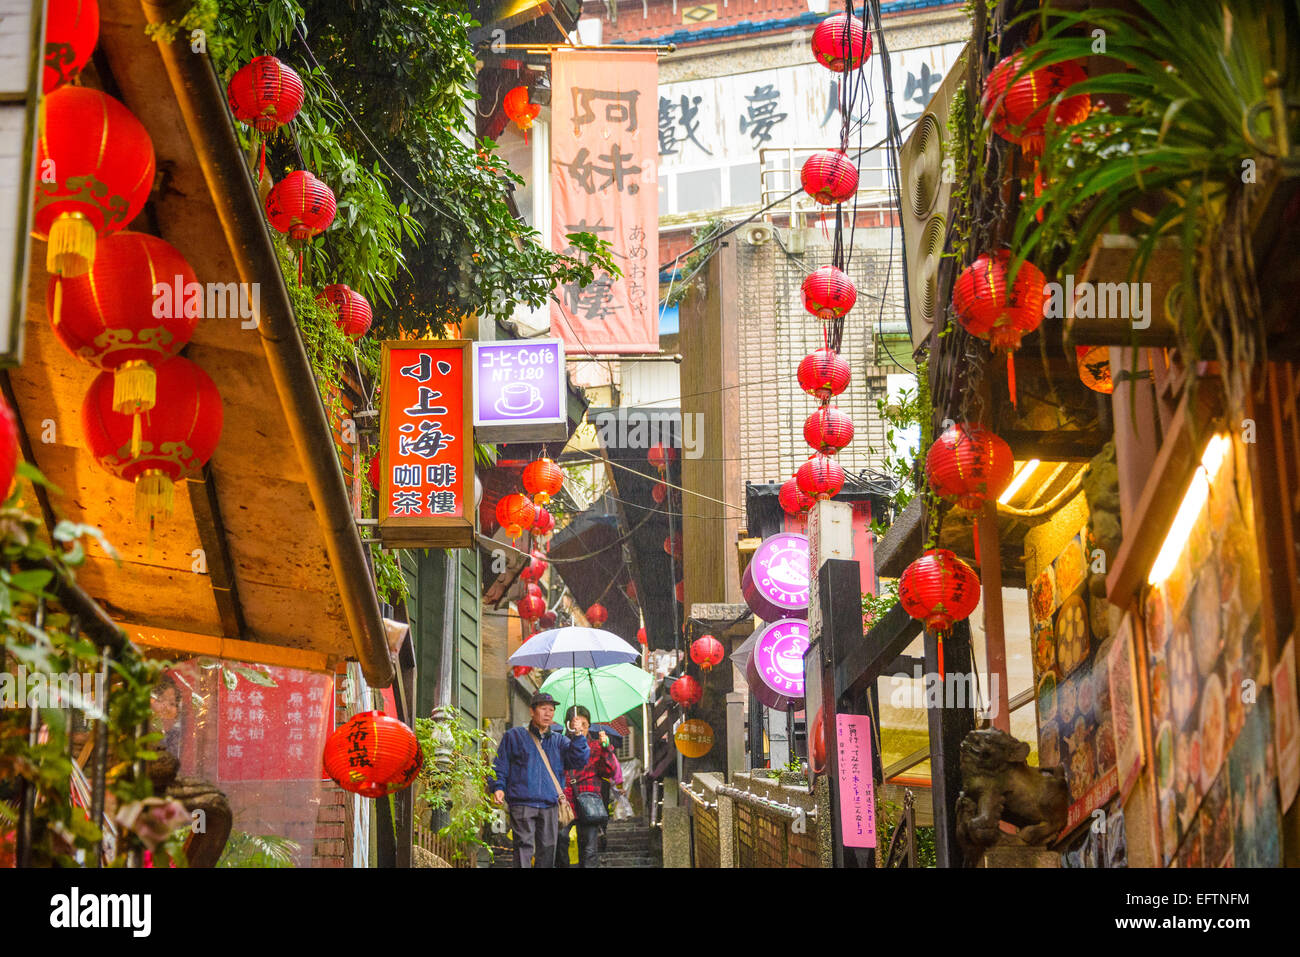 JIUFEN, TAIWAN - JANUARY 17, 2013: Tourists stroll through quaint alleys of Jiufen. The town is a tourist attraction renown for  Stock Photo